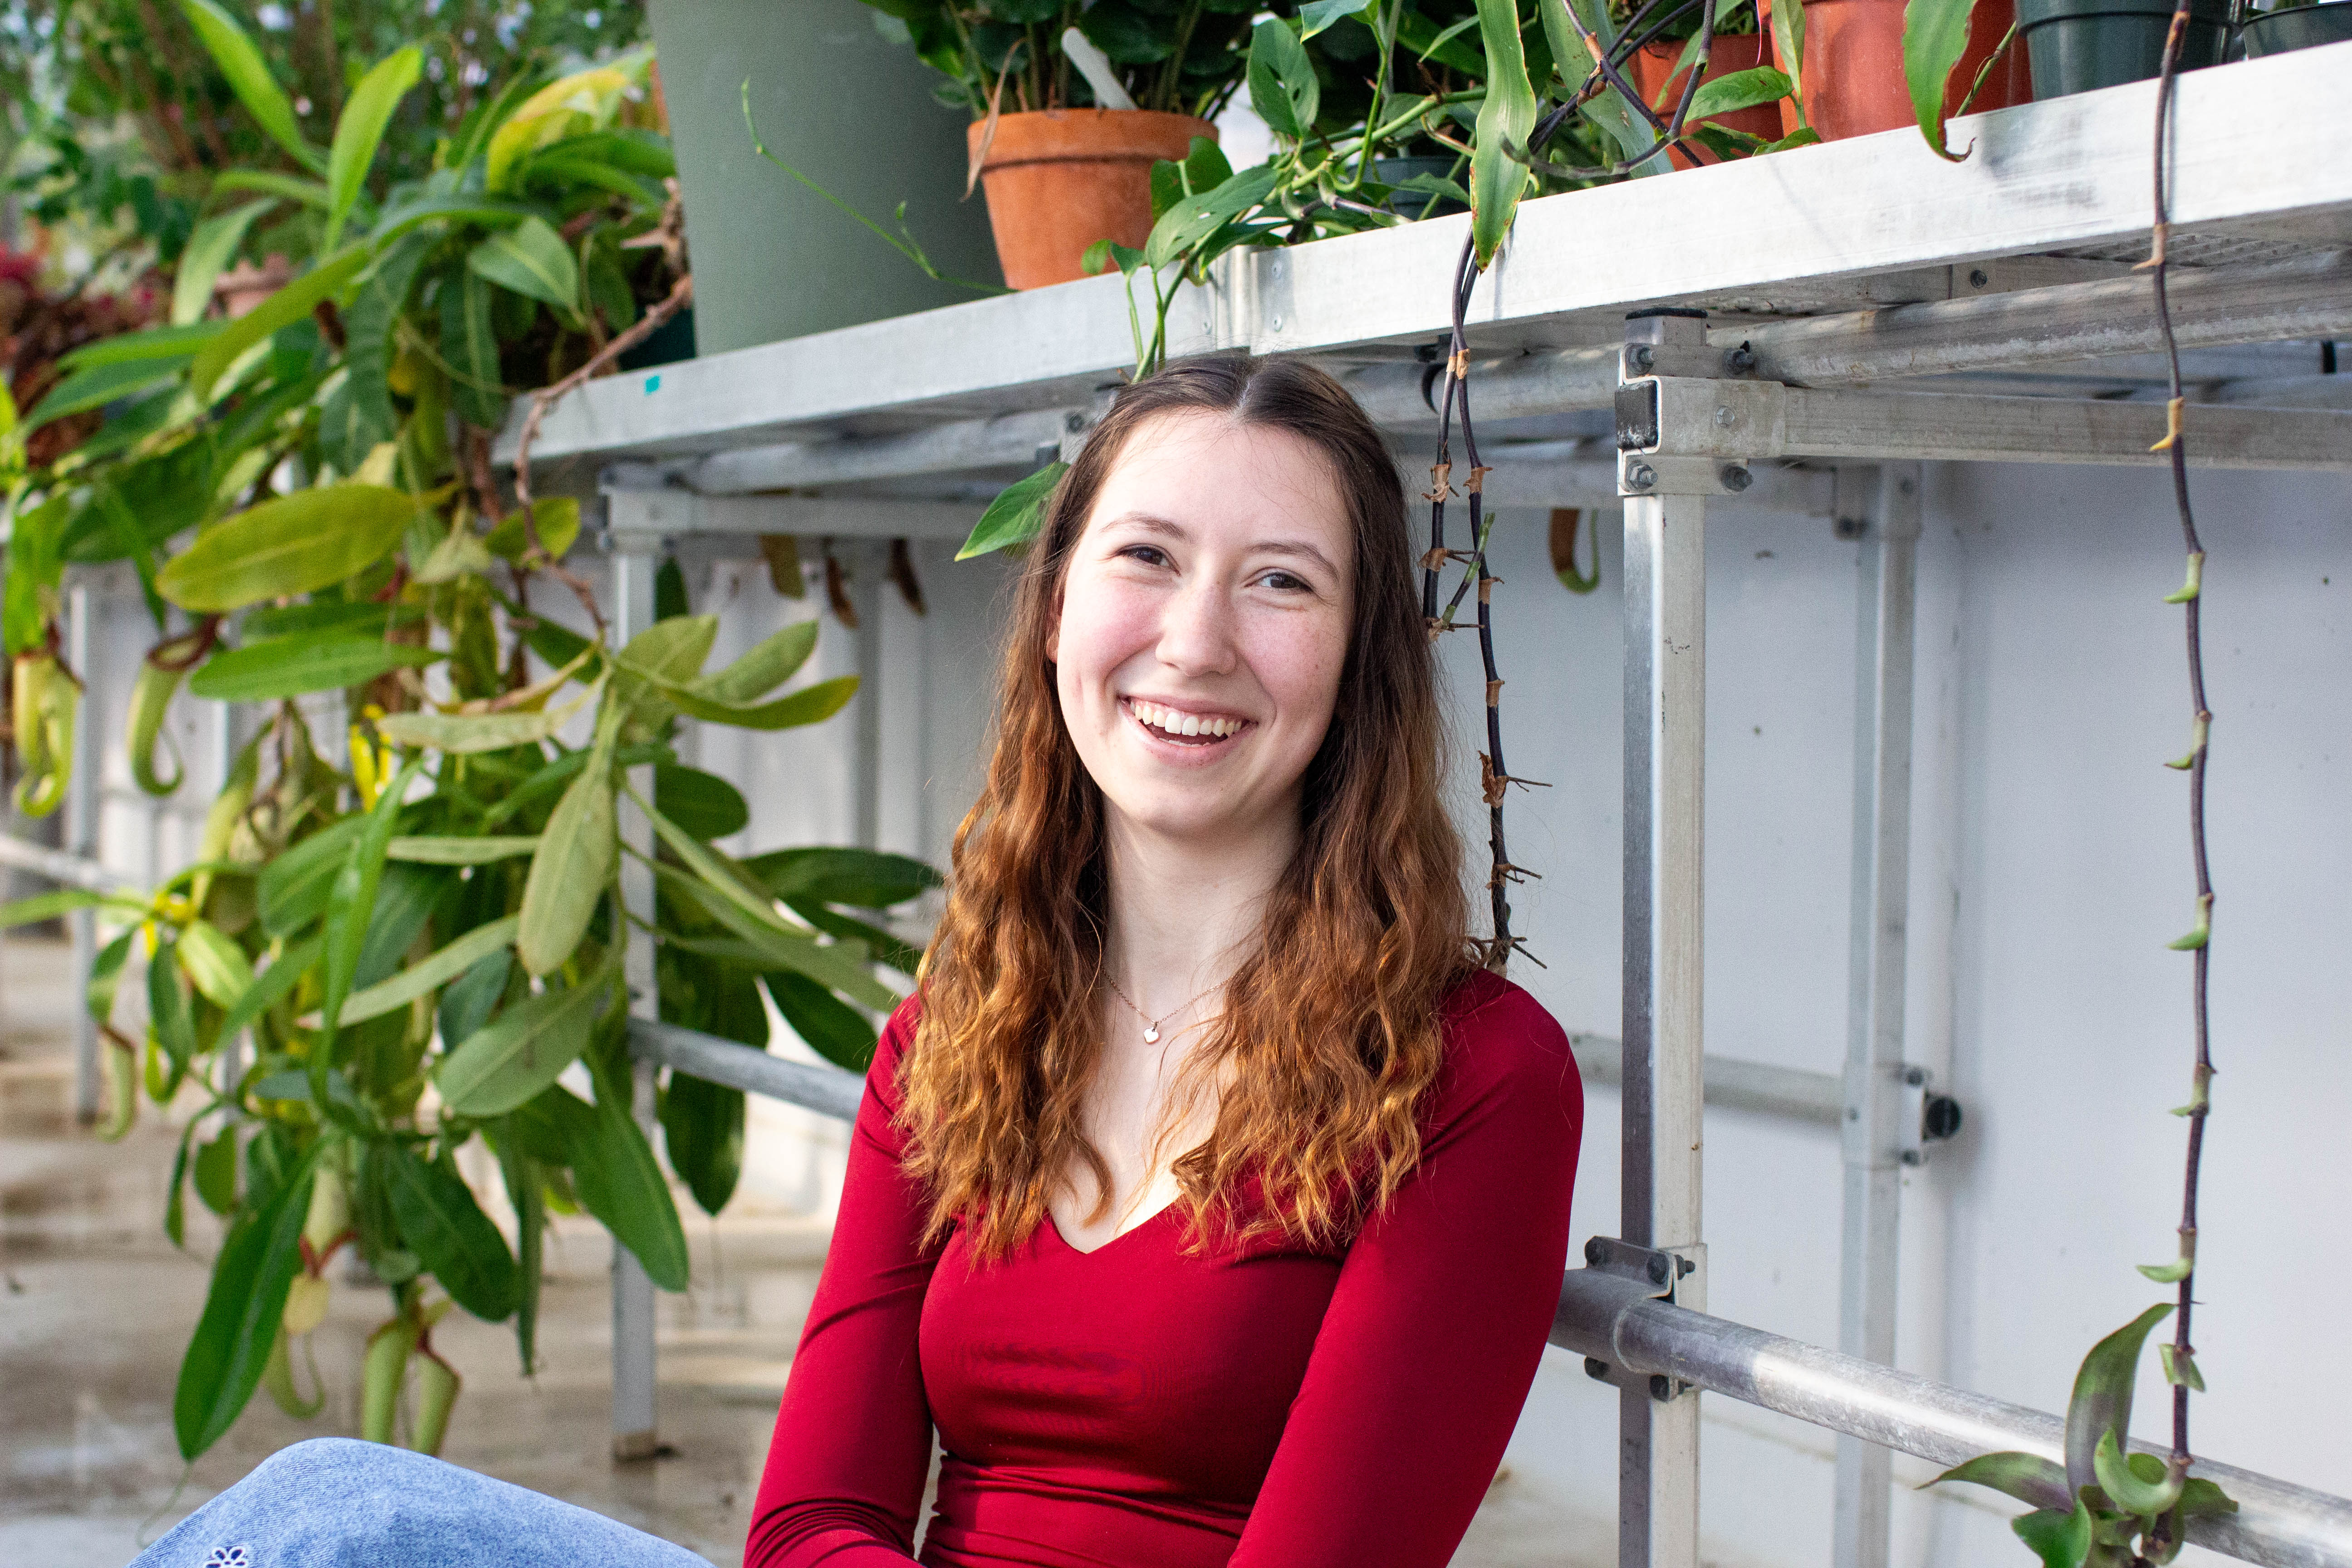 Cunningham’s work was funded by a Charles Center Honors Fellowship and focuses on the hybridization, or crossbreeding, of plants due to climate change. (Photo by Tess Willett)